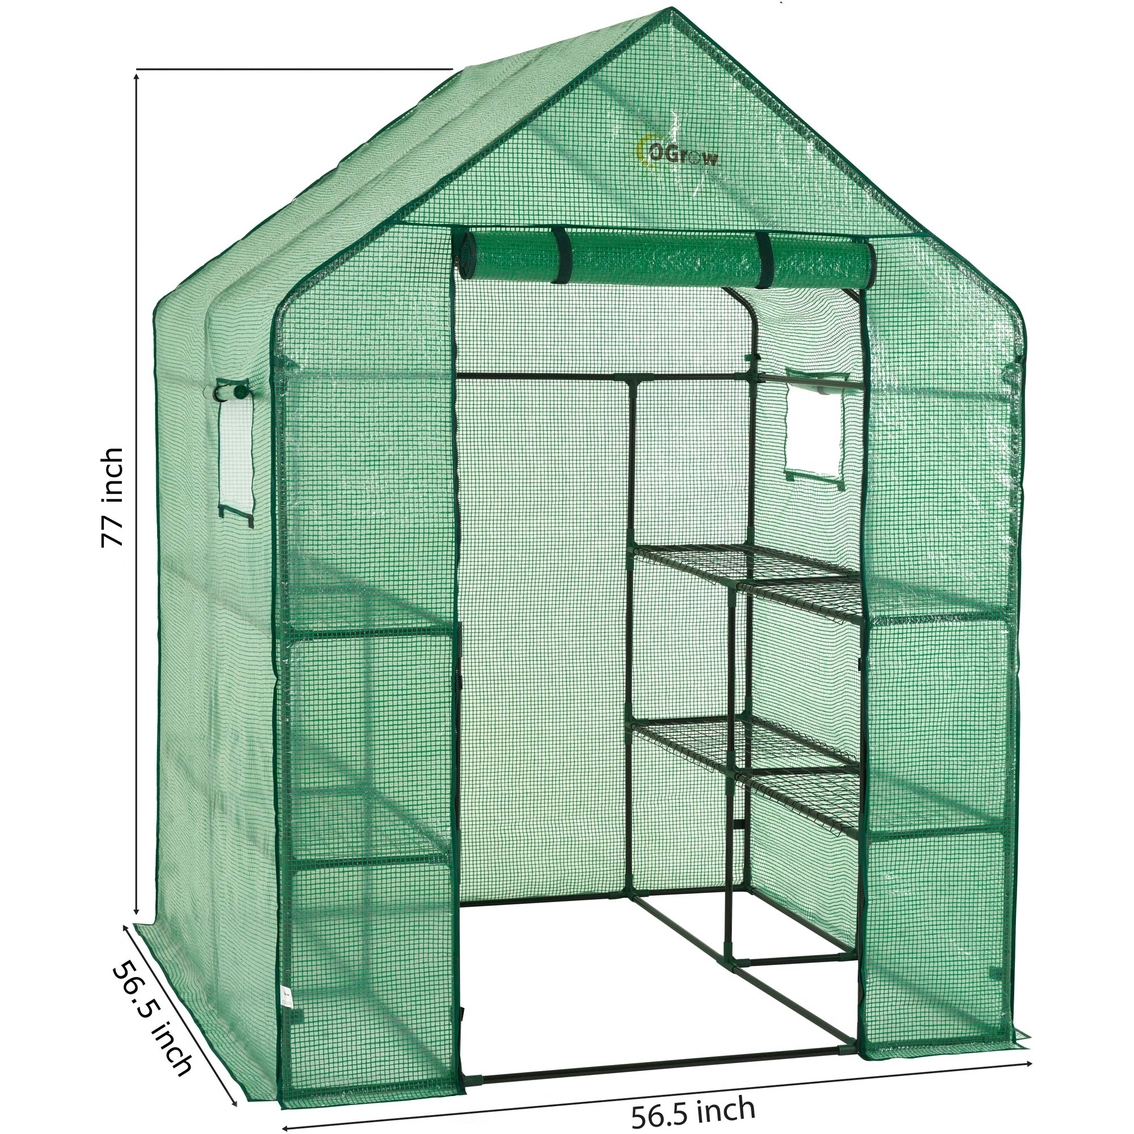 Ogrow 2 Tier 8 Shelf Greenhouse PE Replacement Cover - Image 5 of 5